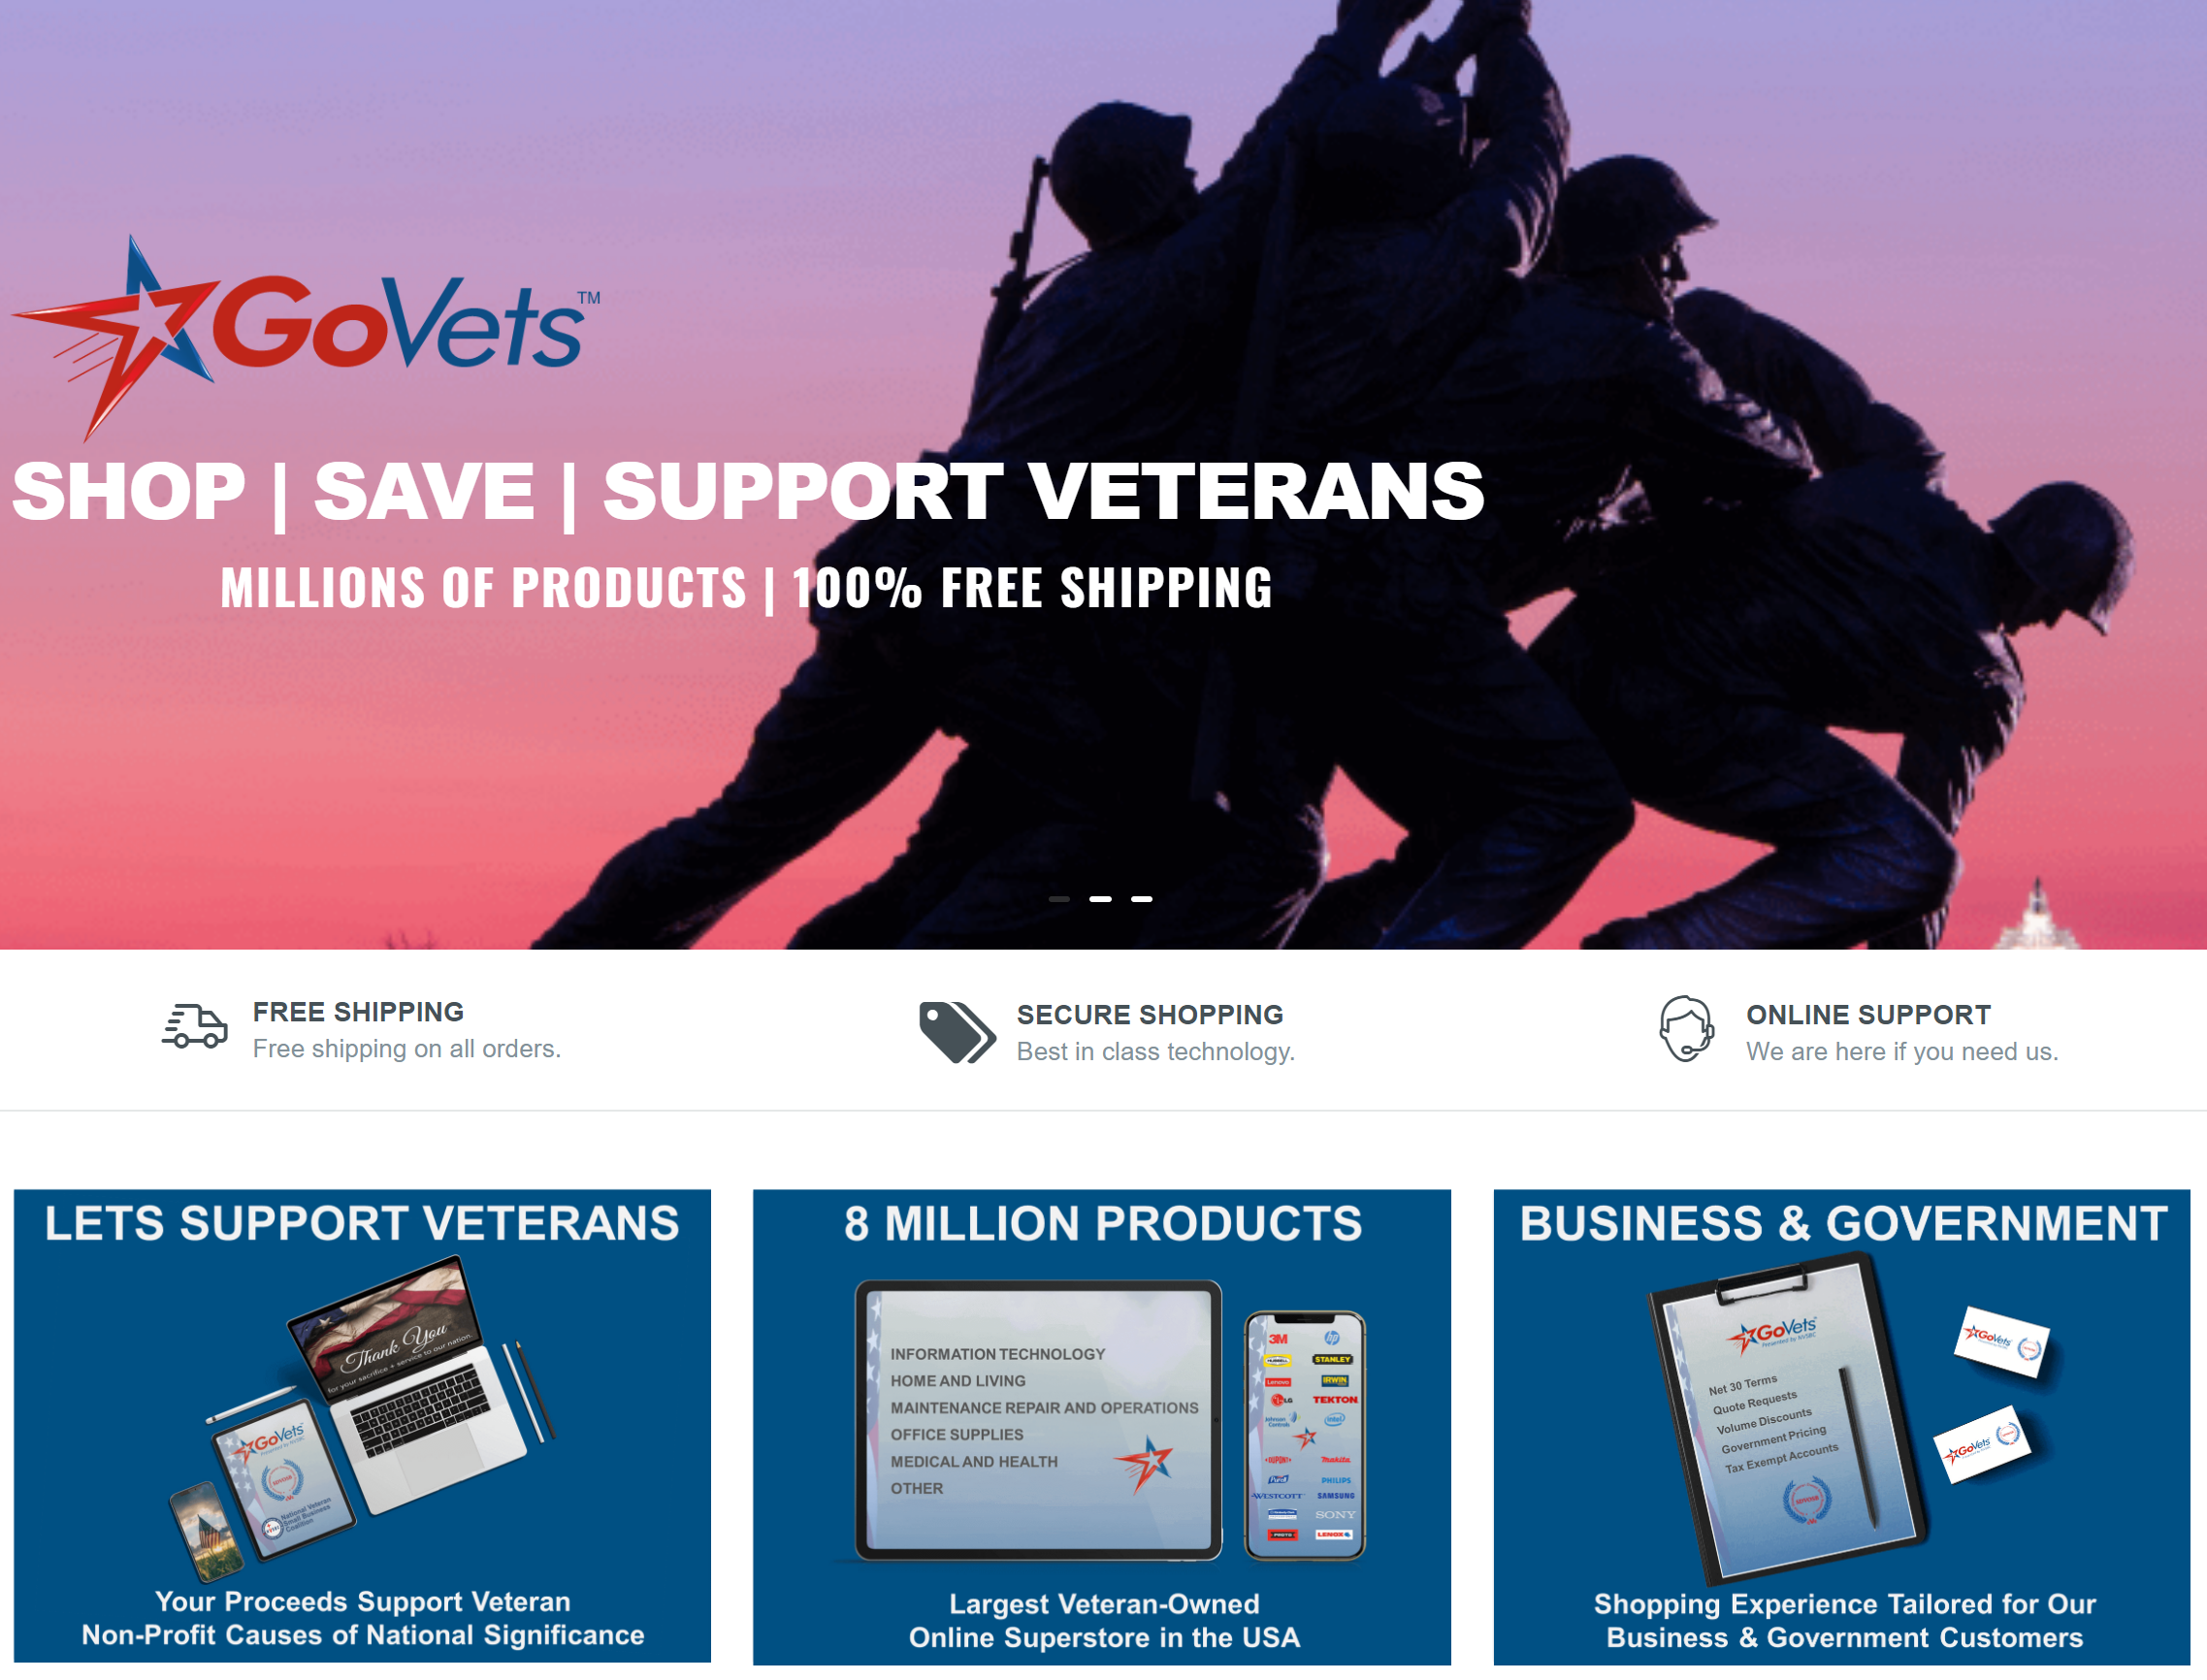 Weekly Top Selling Products on  - GoVets offers millions of products and 100% free shipping - whether you're buying a $25 item or a 2500 LBS item that must be delivered via freight, shipping is free. 